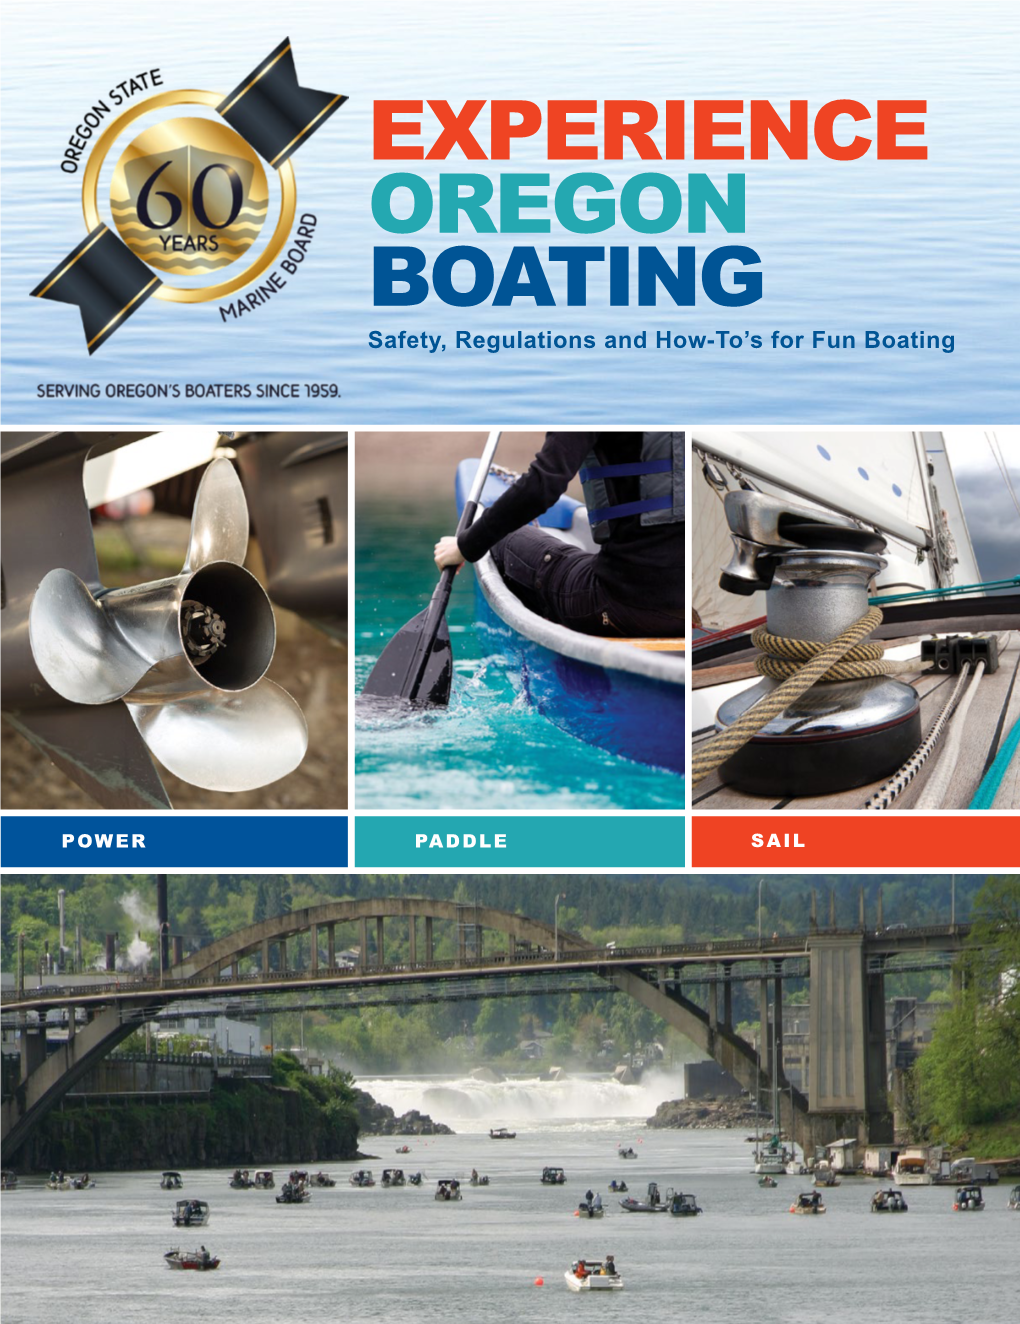 EXPERIENCE OREGON BOATING Safety, Regulations and How-To’S for Fun Boating